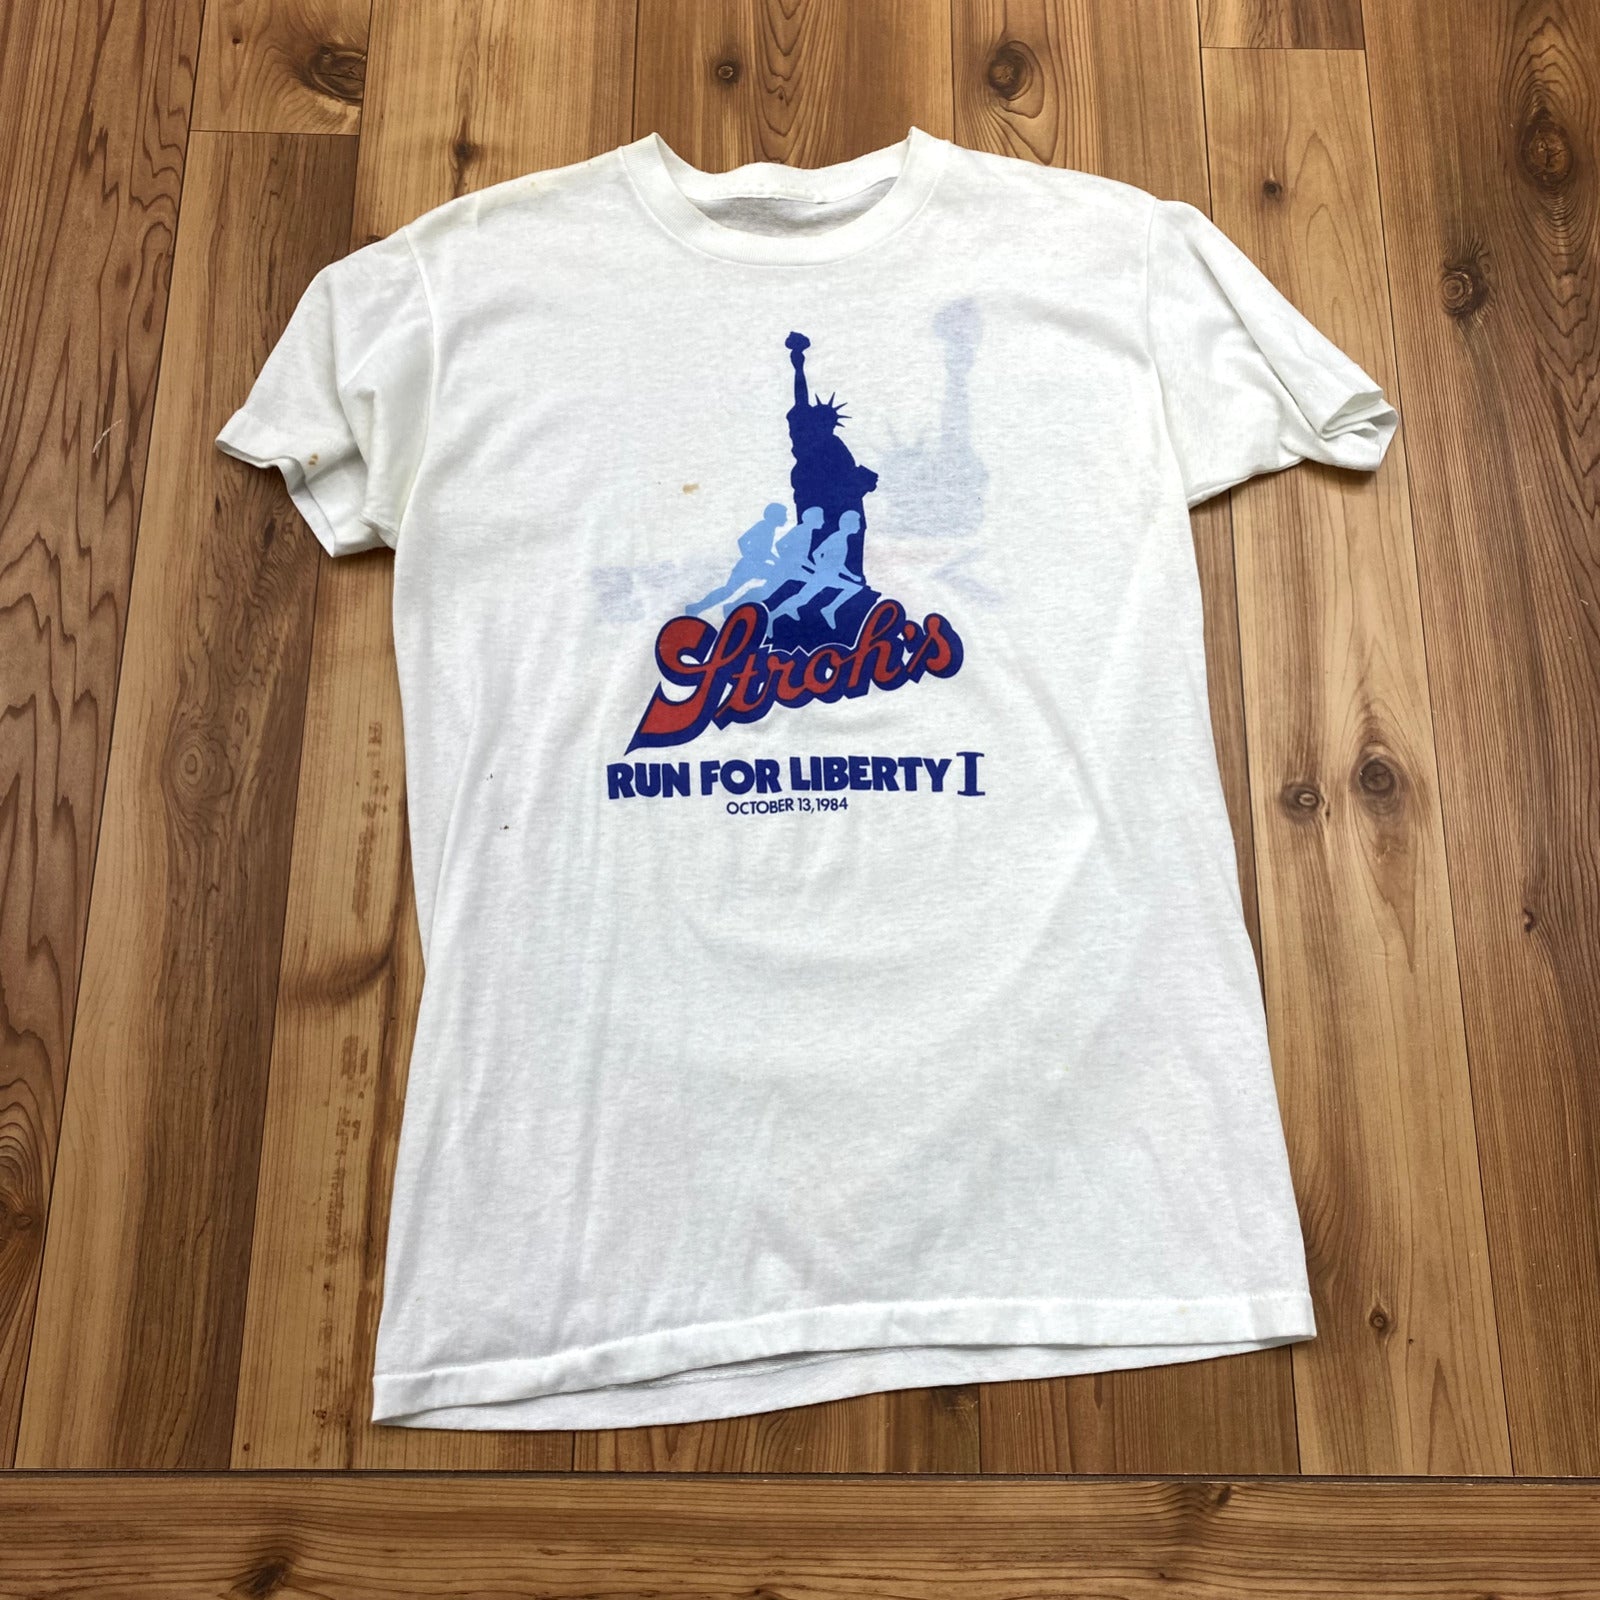 1984 Vintage Unbranded White Stroh's Run For Liberty T-Shirt Adult Size S